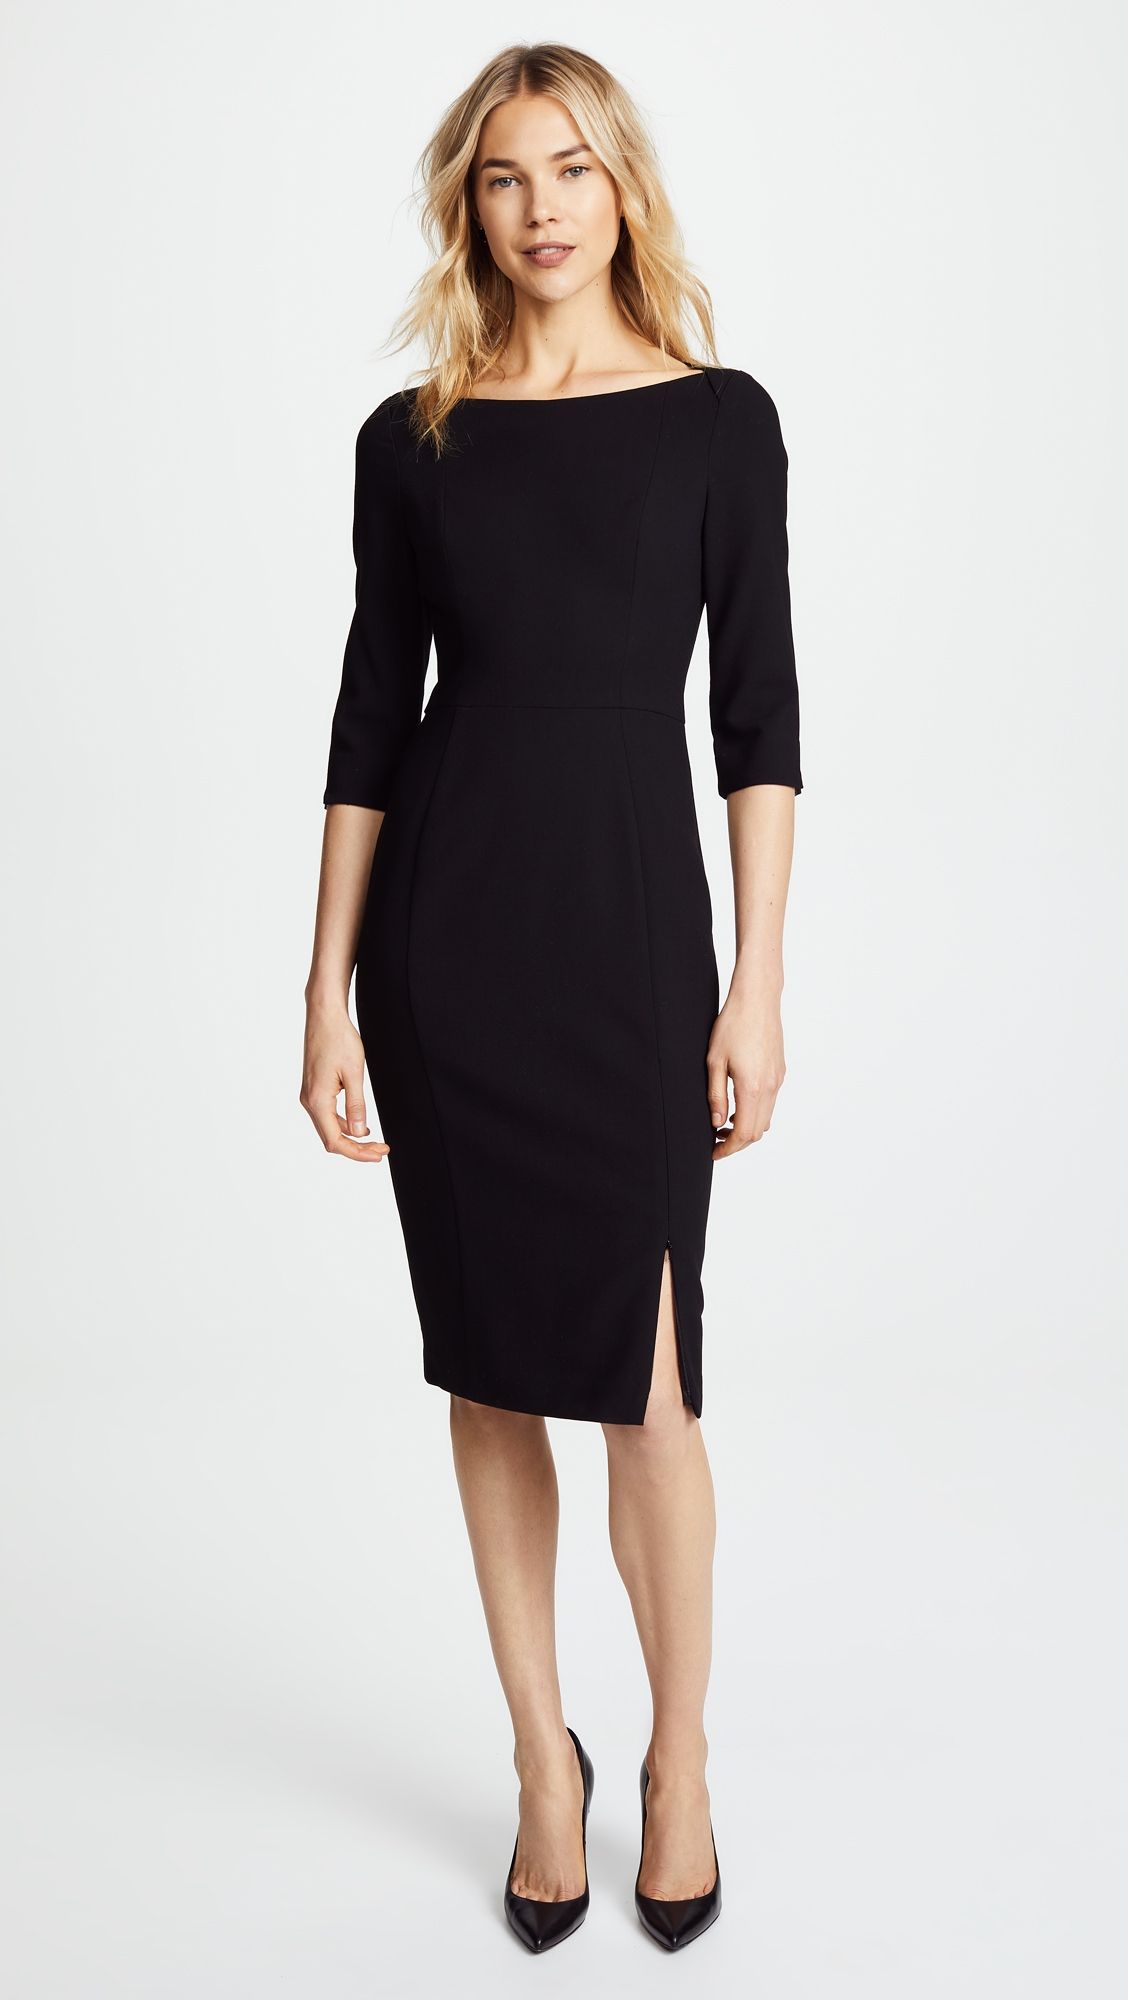 Chic Sophistication: Step Out in Style with a Sheath Dress